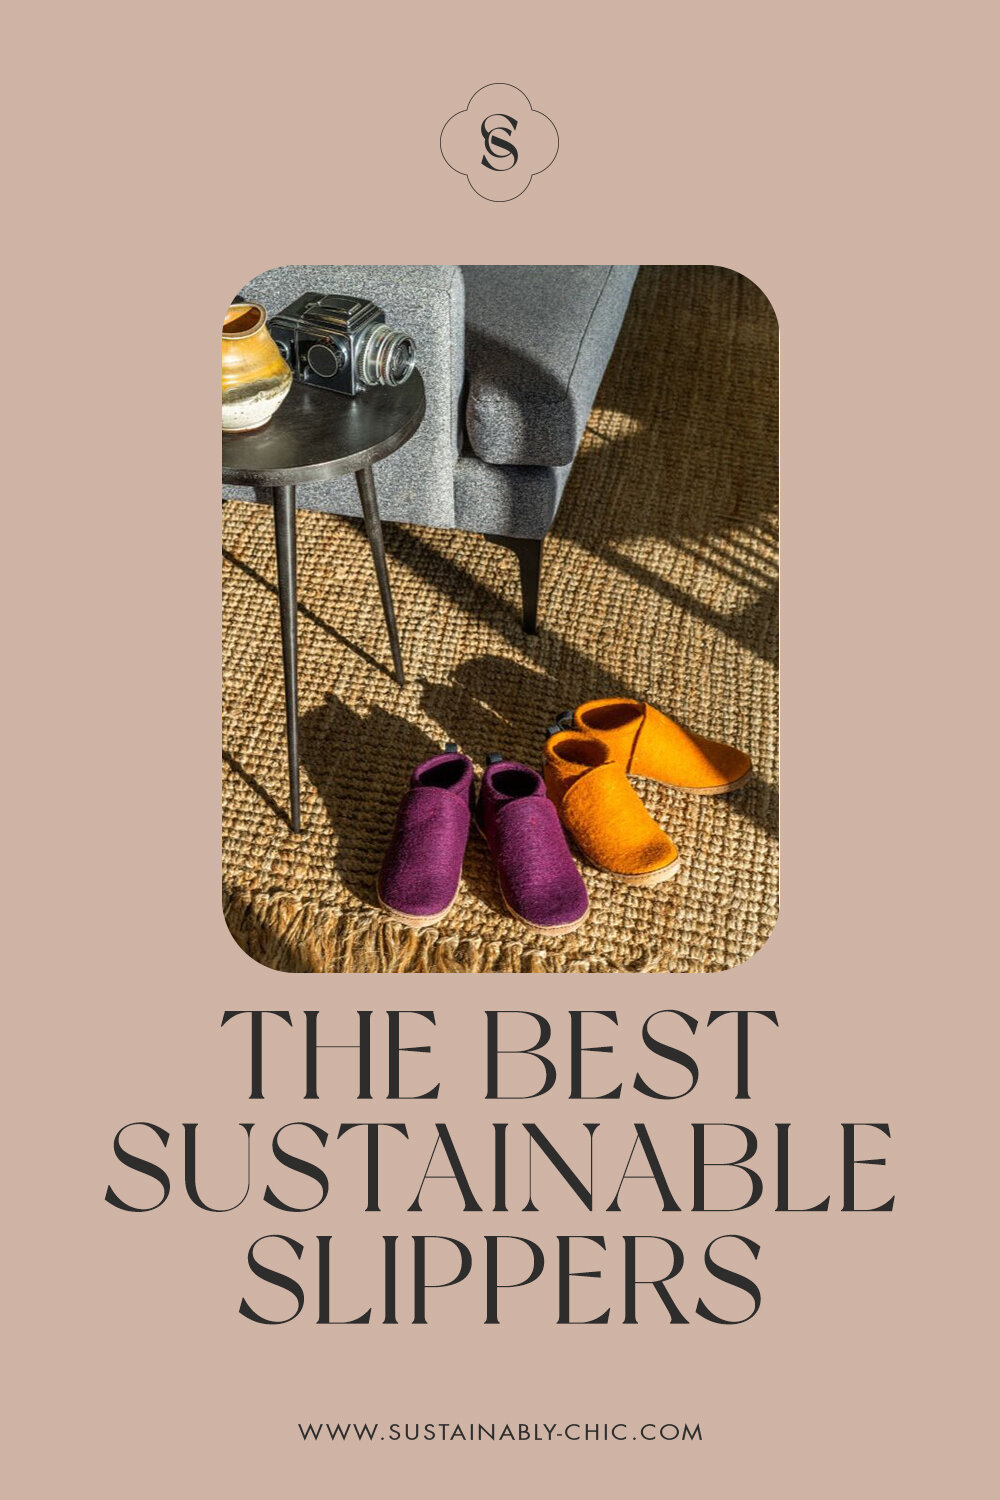 Sustainably Chic | Sustainable Fashion Blog | The Best Sustainable Slippers for Cozy Feet.jpg